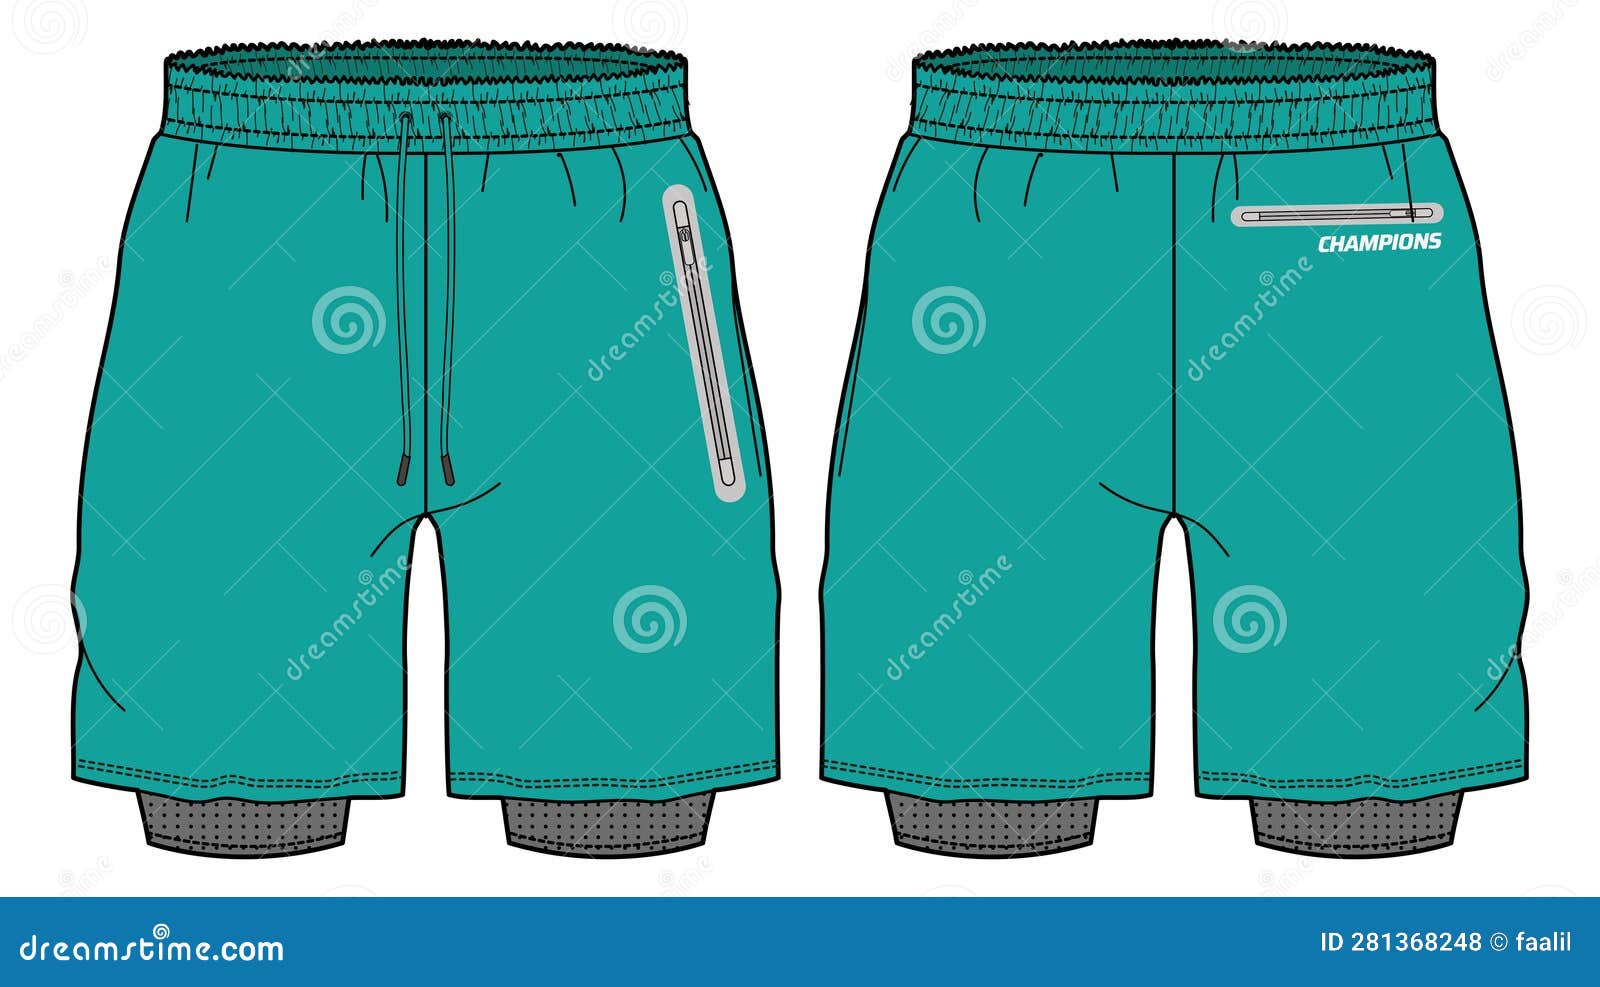 https://thumbs.dreamstime.com/z/sport-track-shorts-compression-tights-design-vector-template-basketball-concept-front-back-view-football-badminton-281368248.jpg